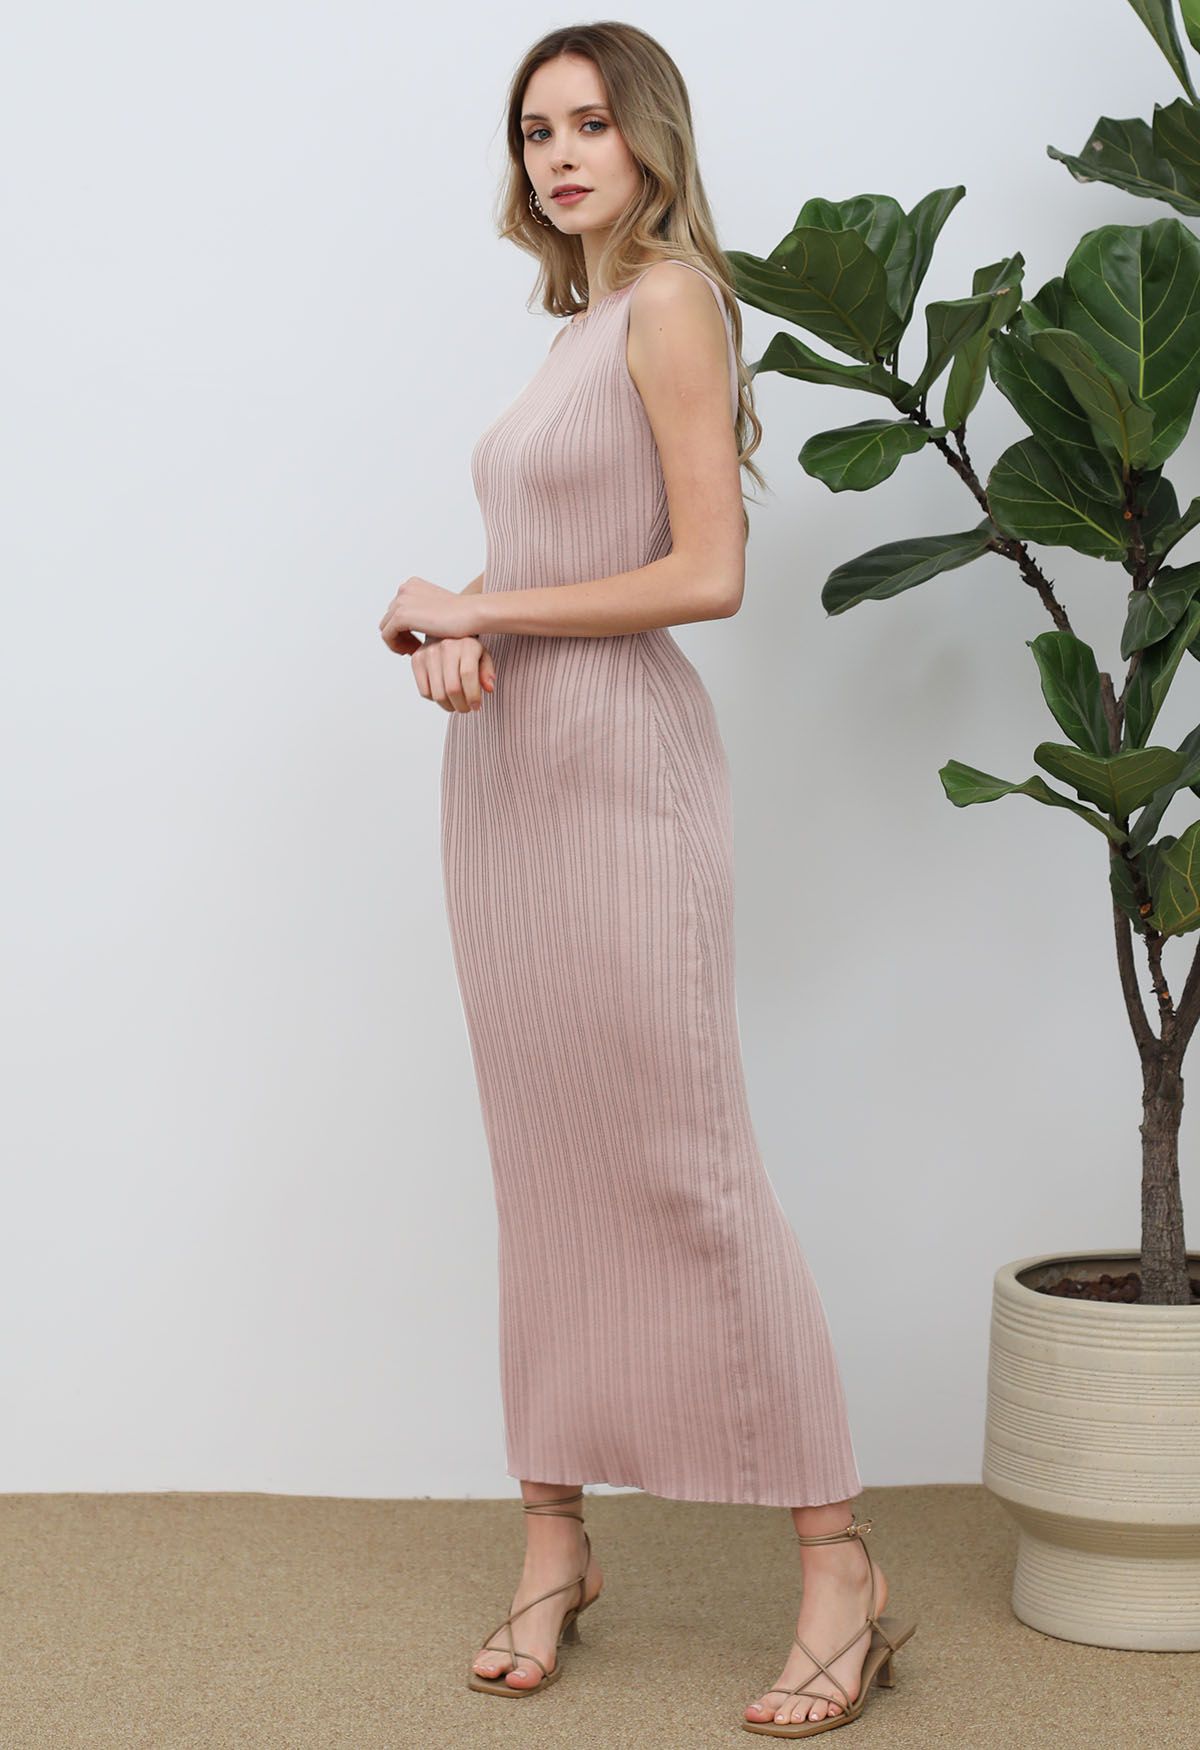 Slit Back Bodycon Sleeveless Knit Maxi Dress in Pink